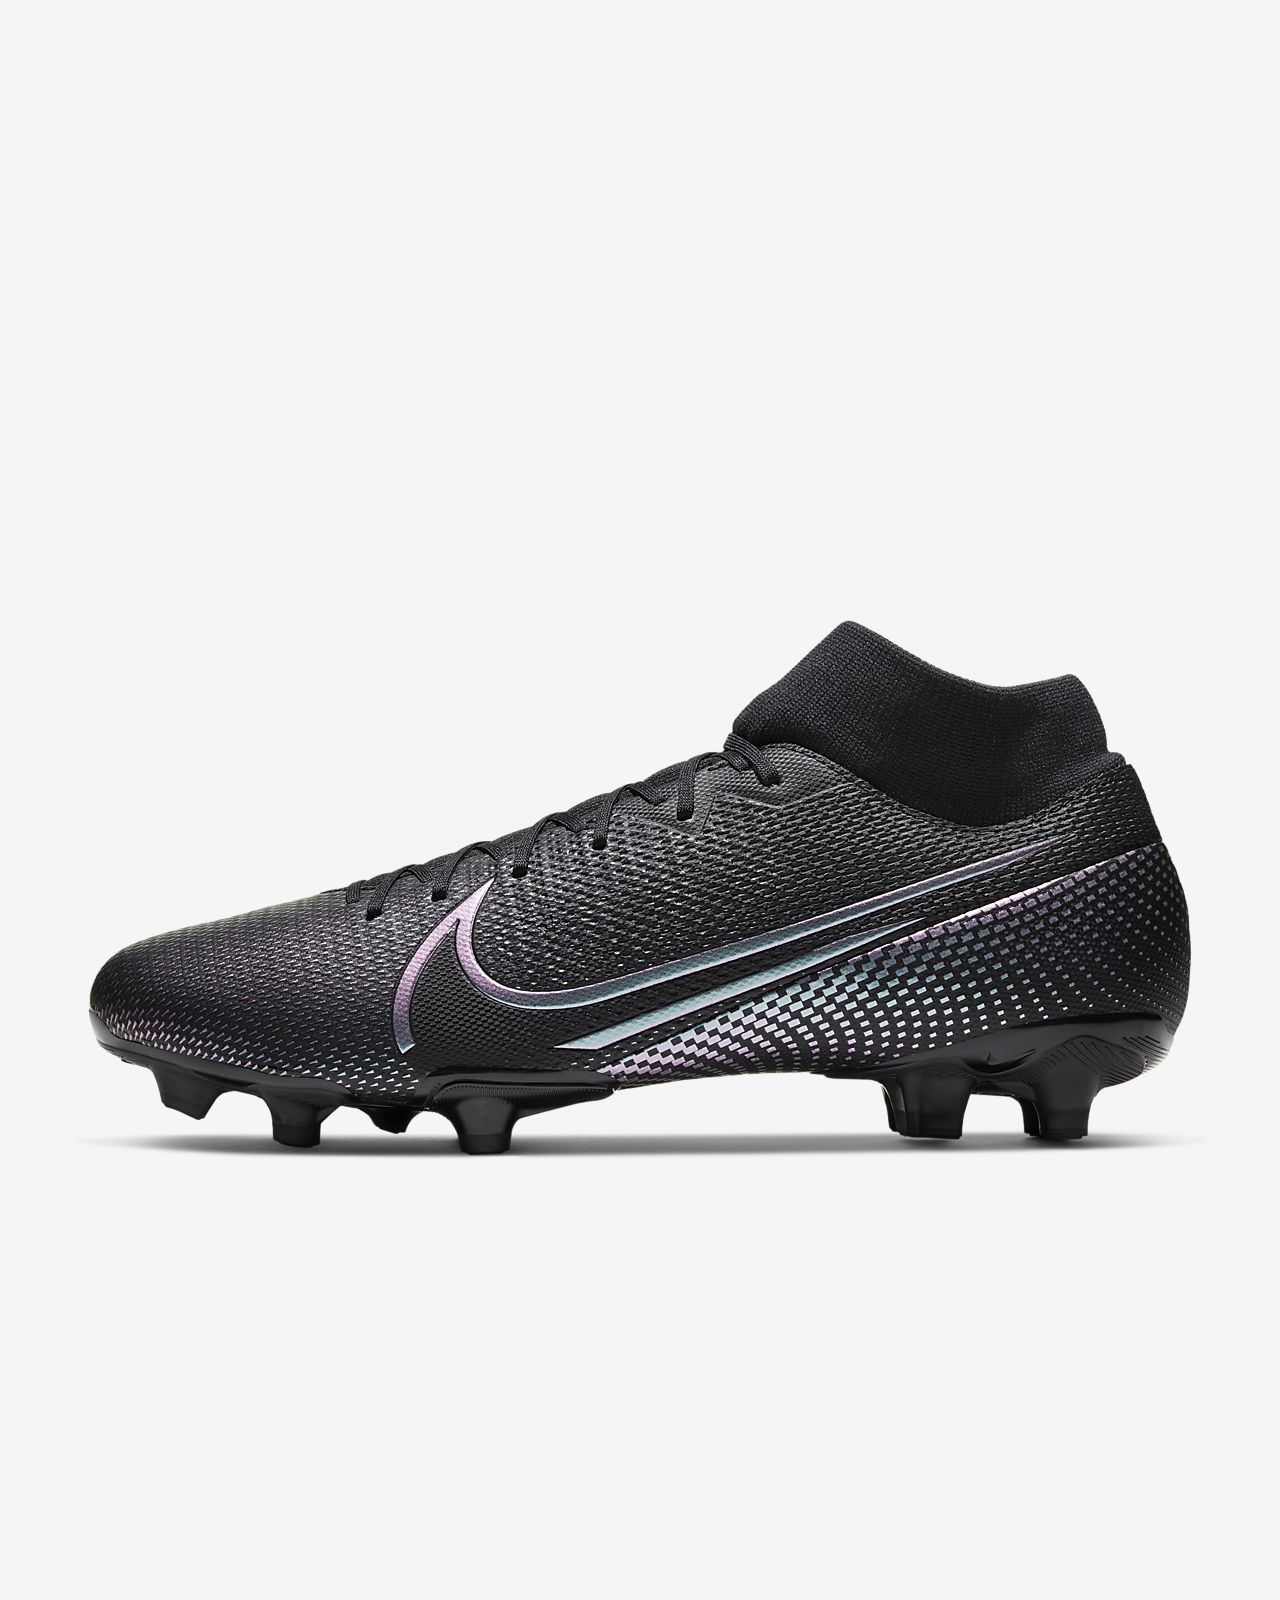 Nike Mercurial Superfly Vi Academy Mg Fitness Shoes.